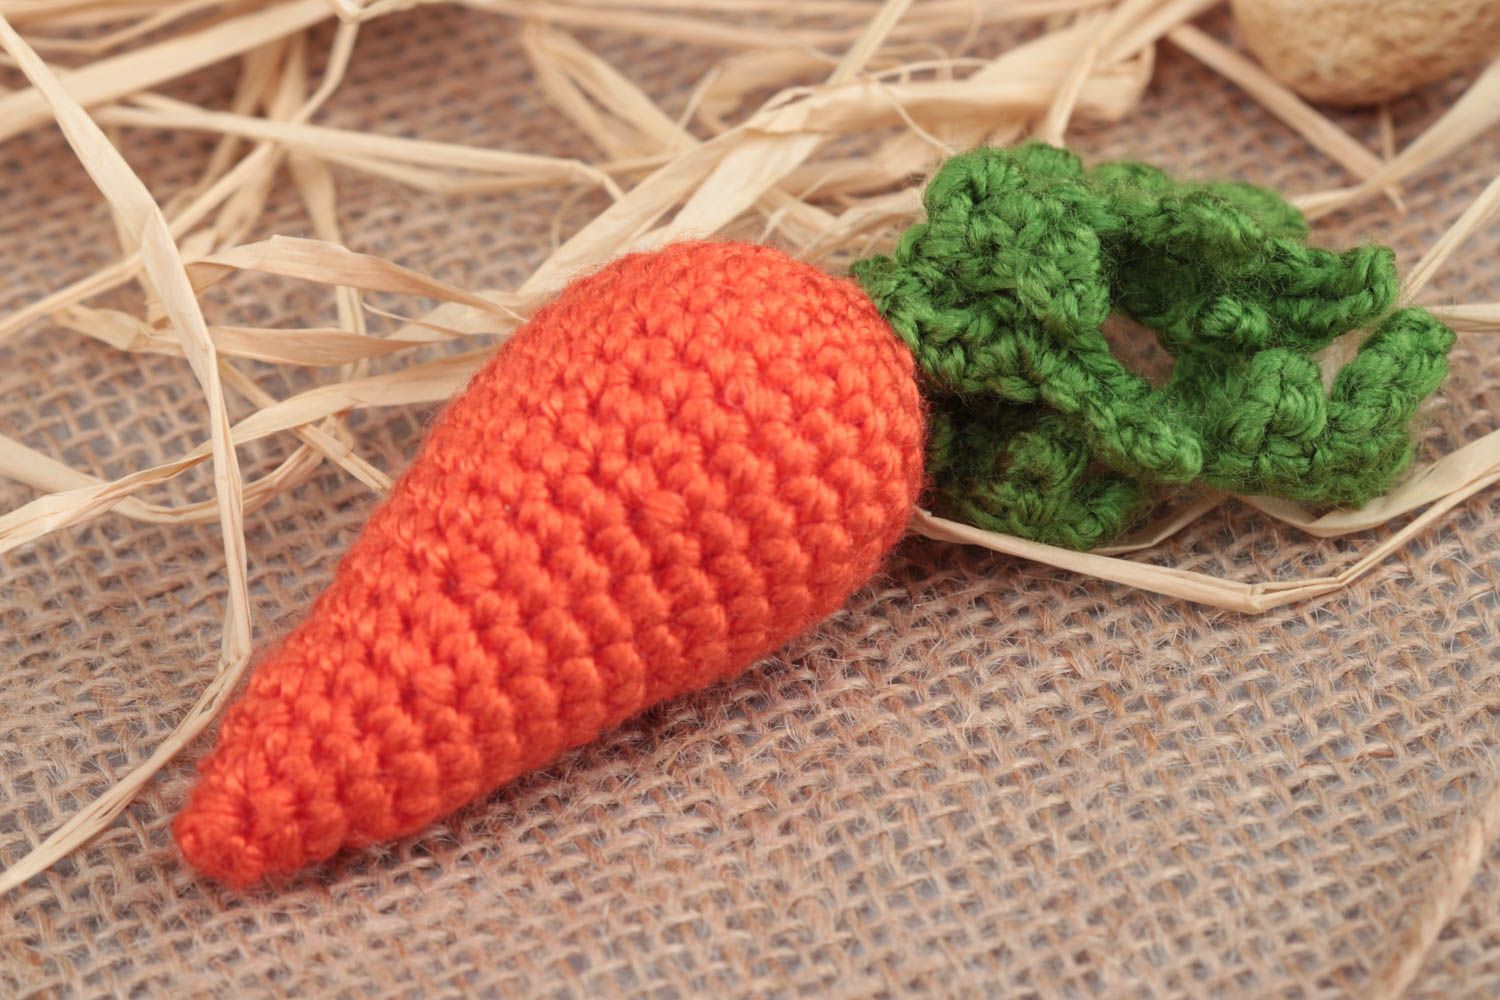 Handmade small acrylic crochet soft toy orange carrot for kids and kitchen decor photo 1